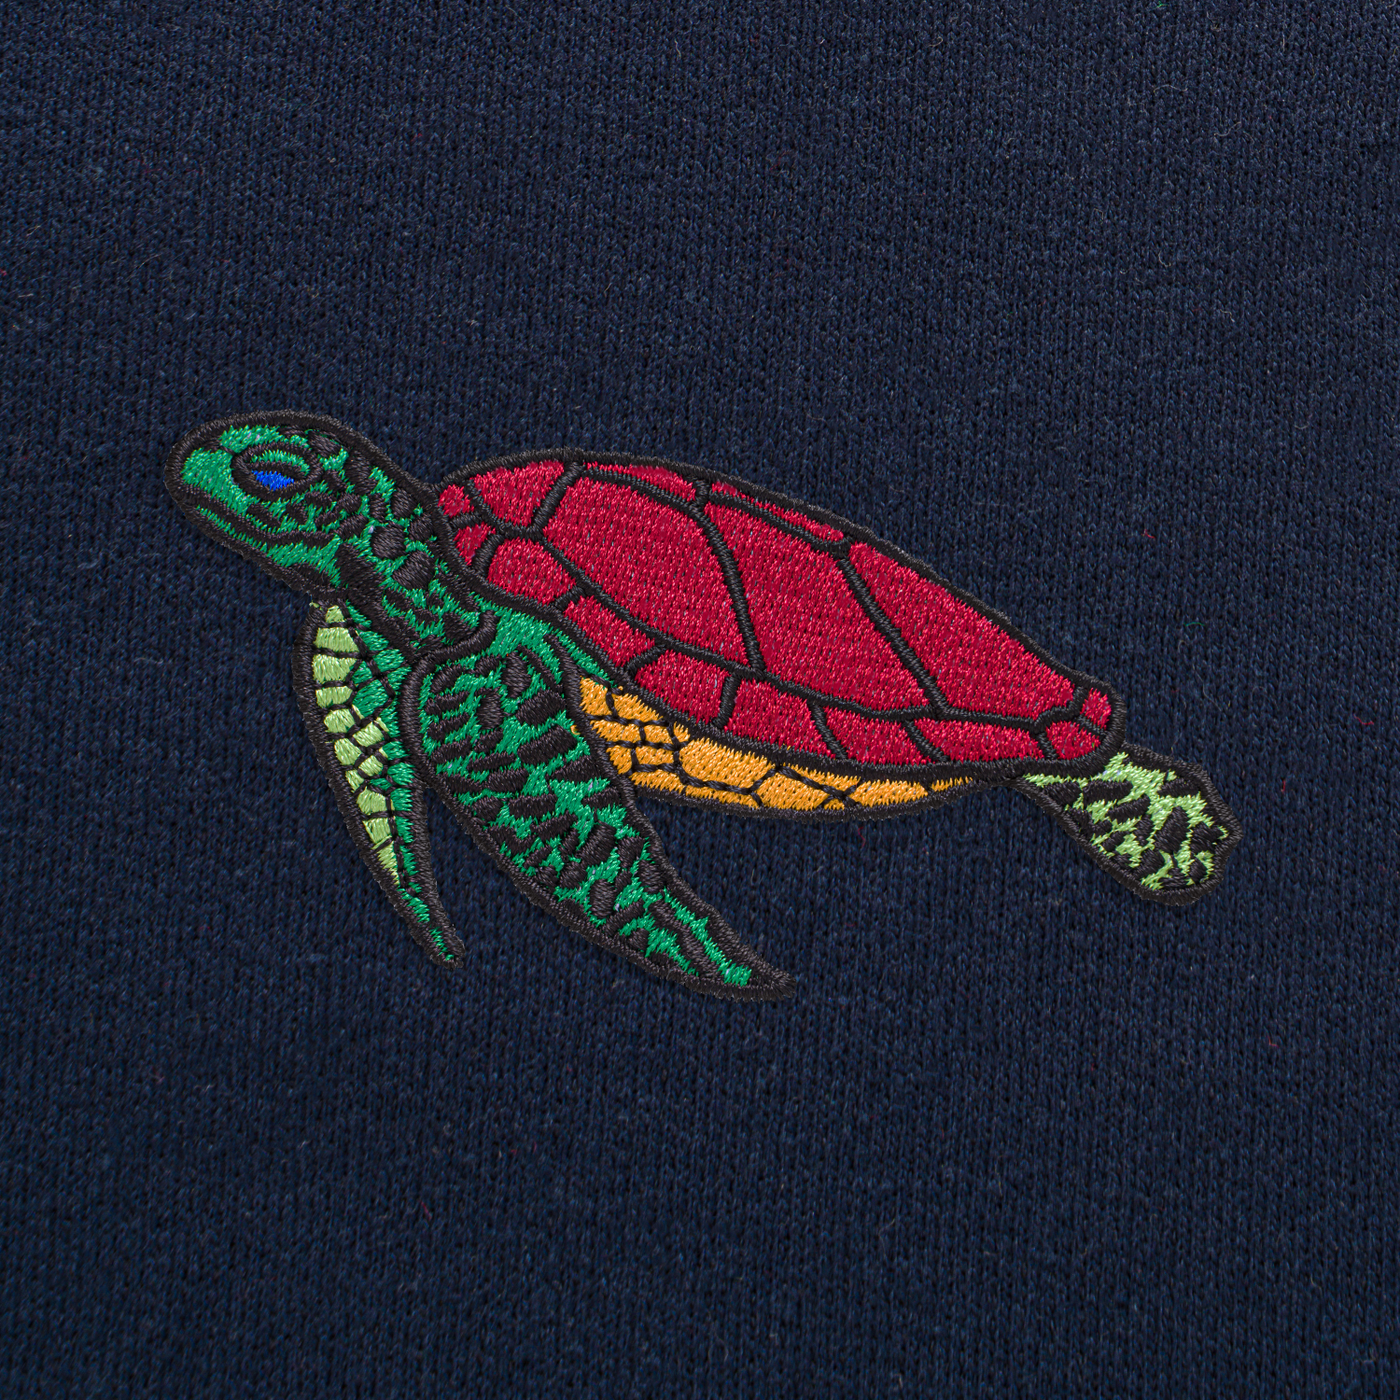 Bobby's Planet Men's Embroidered Sea Turtle Sweatshirt from Seven Seas Fish Animals Collection in Navy Color#color_navy